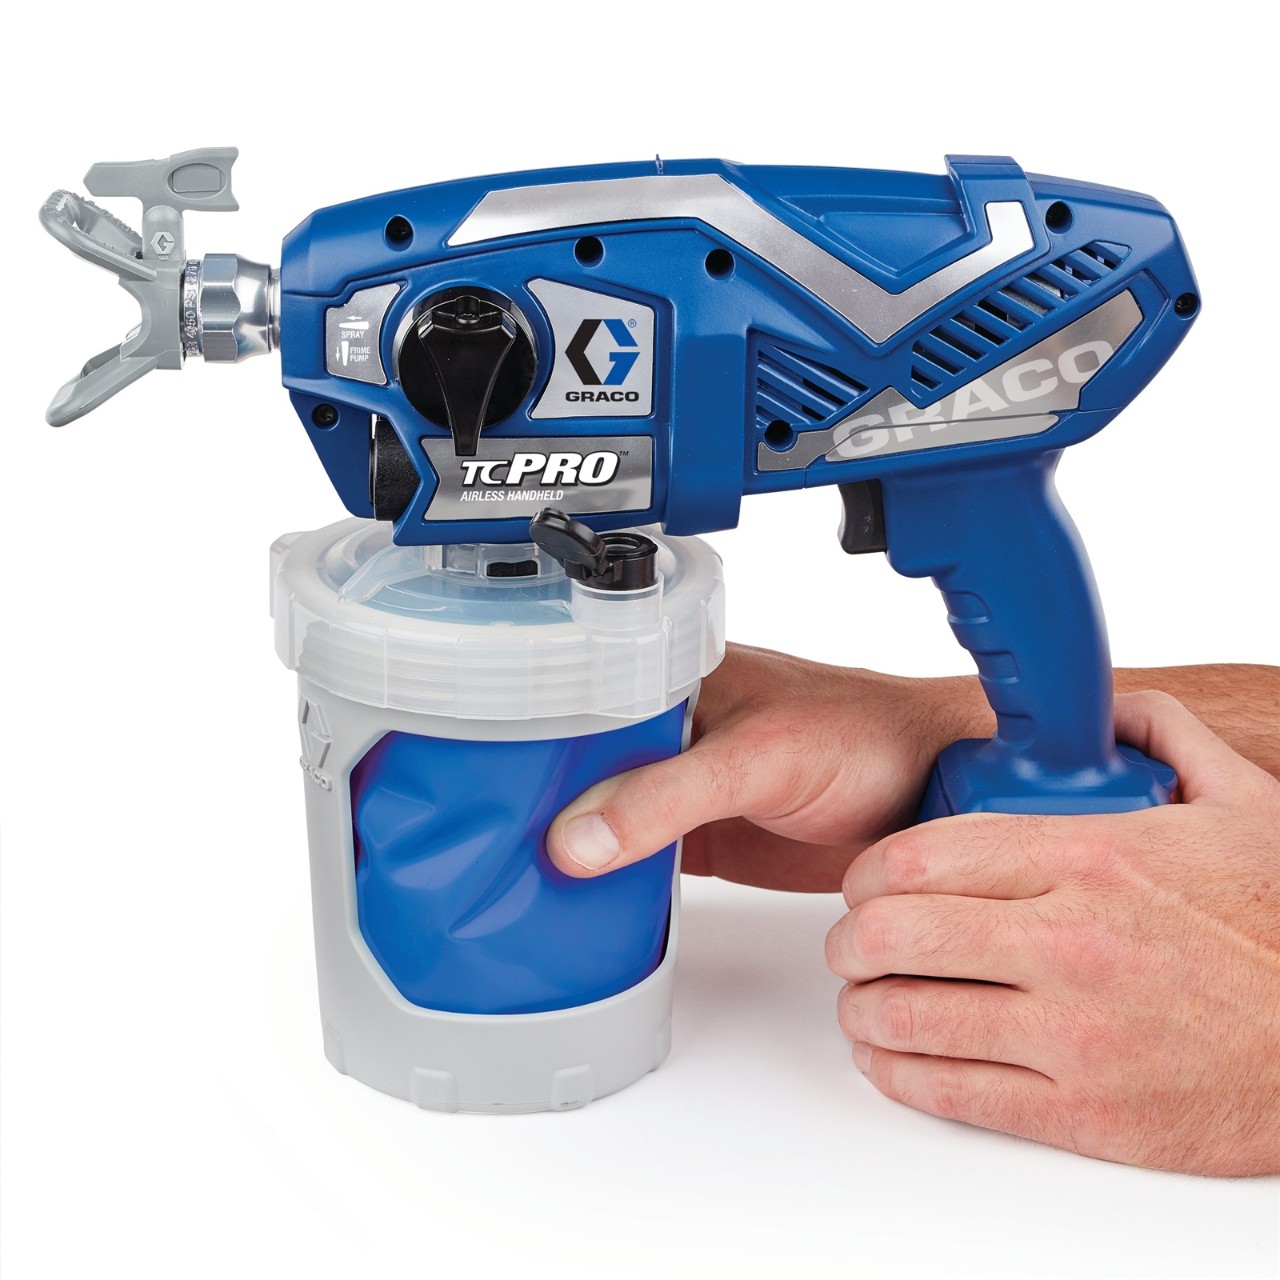 Using Your Graco Paint Sprayer